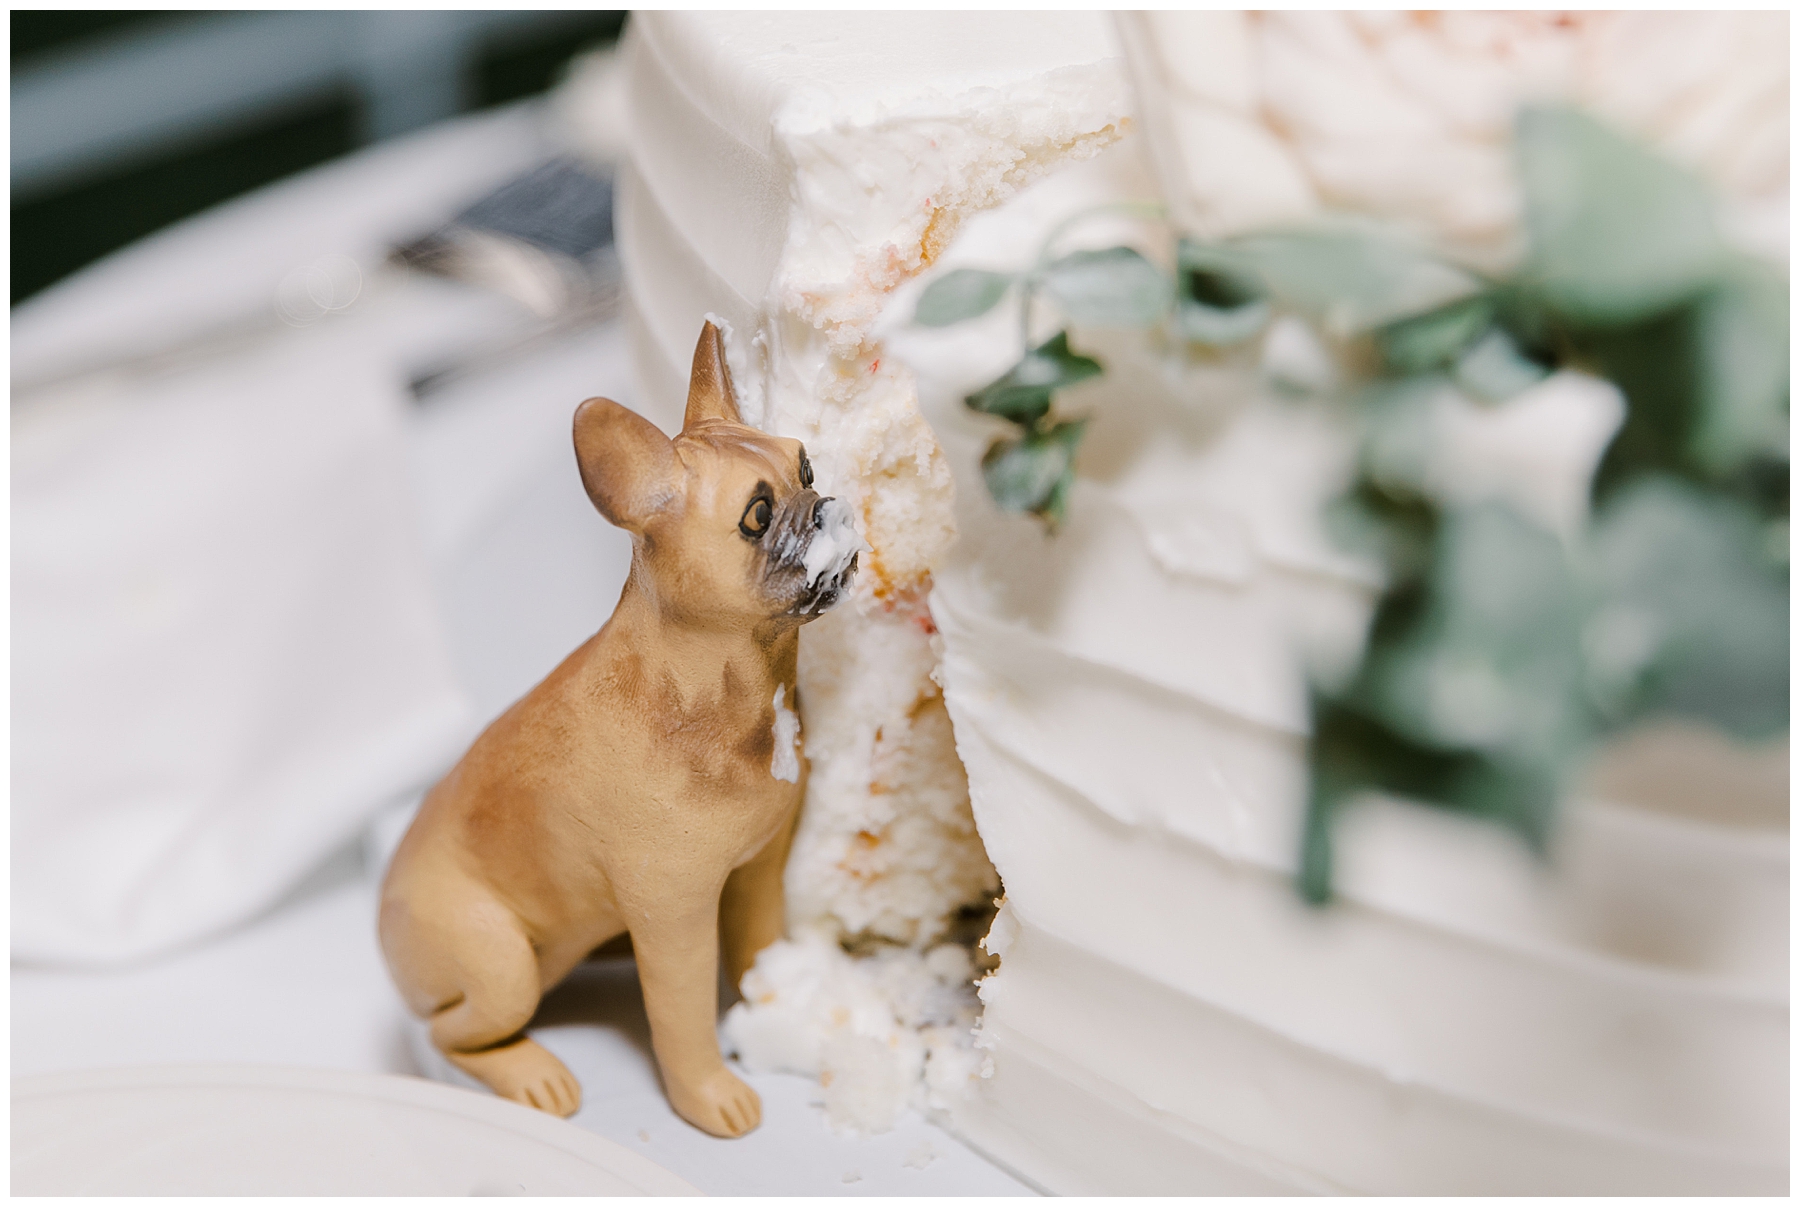 wedding detail of dog figurine on cake made to look like he was eating it 